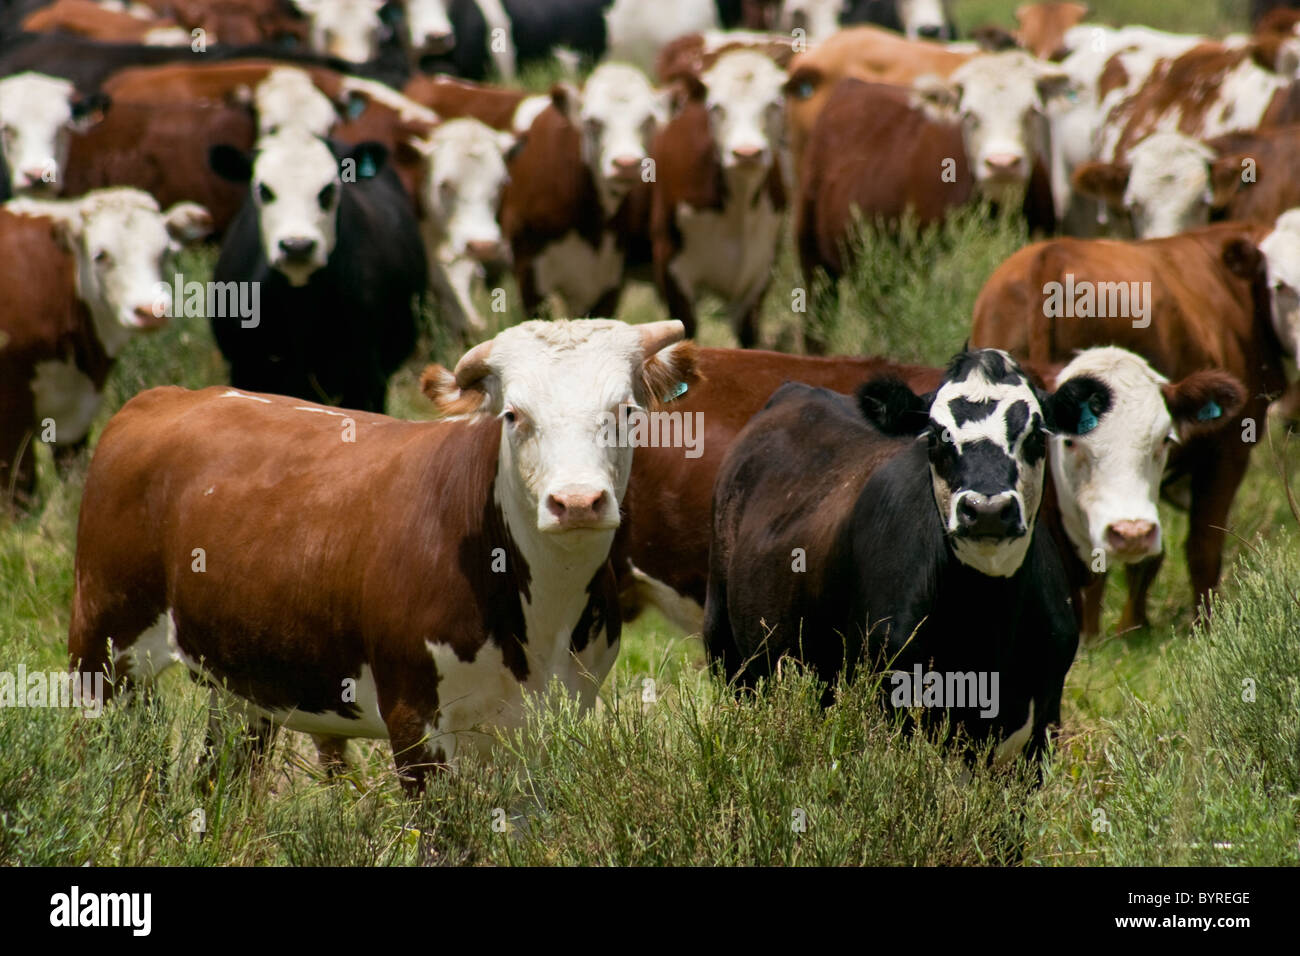 Agriculture - A herd of Crossbred beef cattle on a green pasture / Uruguay. Stock Photo